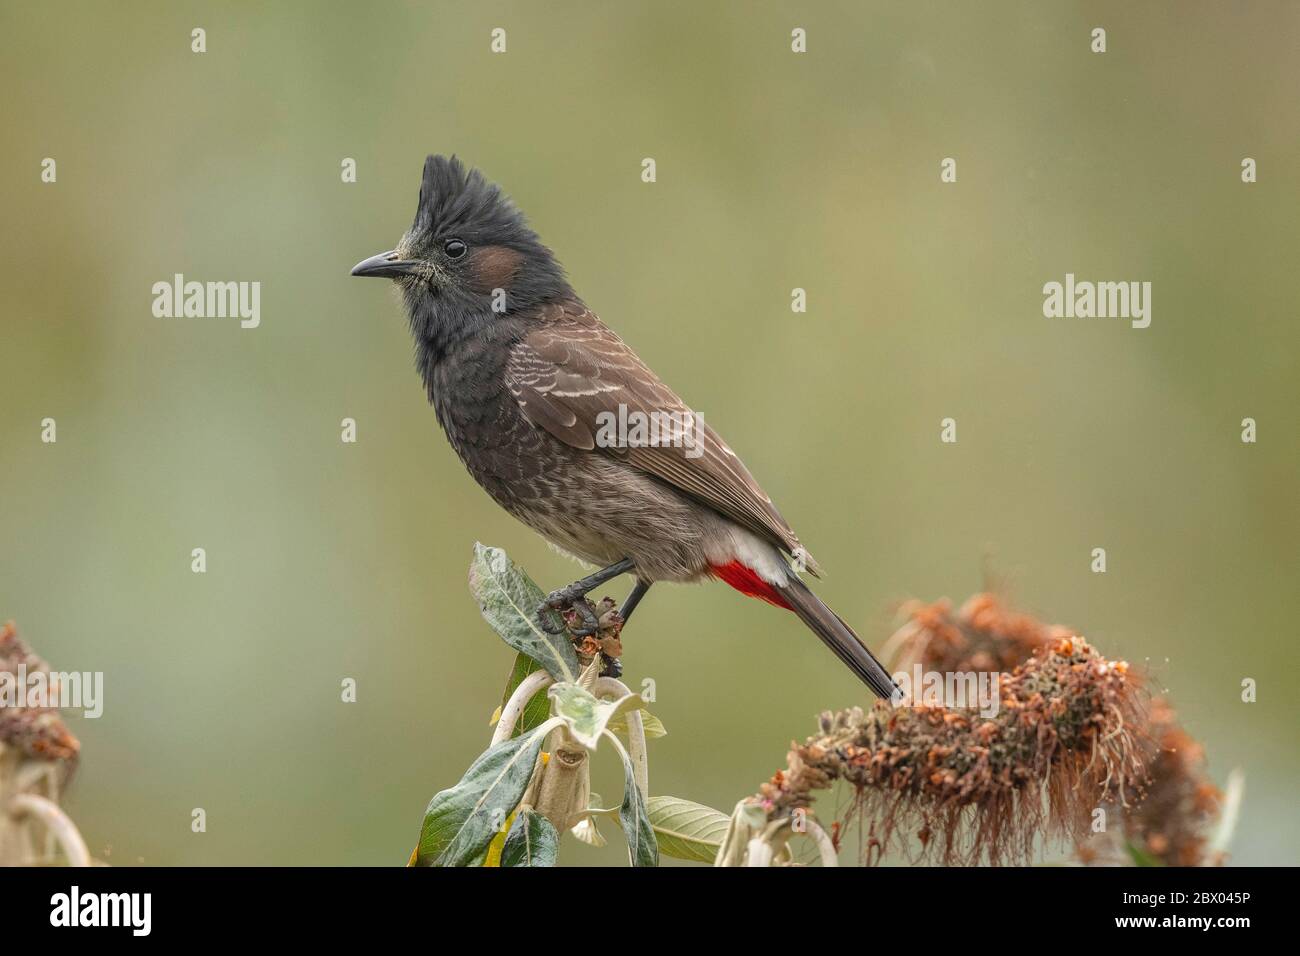 Red-ventilated Bulbul, bengalensis, Pycnonotus cafer bengalensis Blyth, 1845, Lava, distretto di Kalimpong, Bengala Occidentale, India Foto Stock